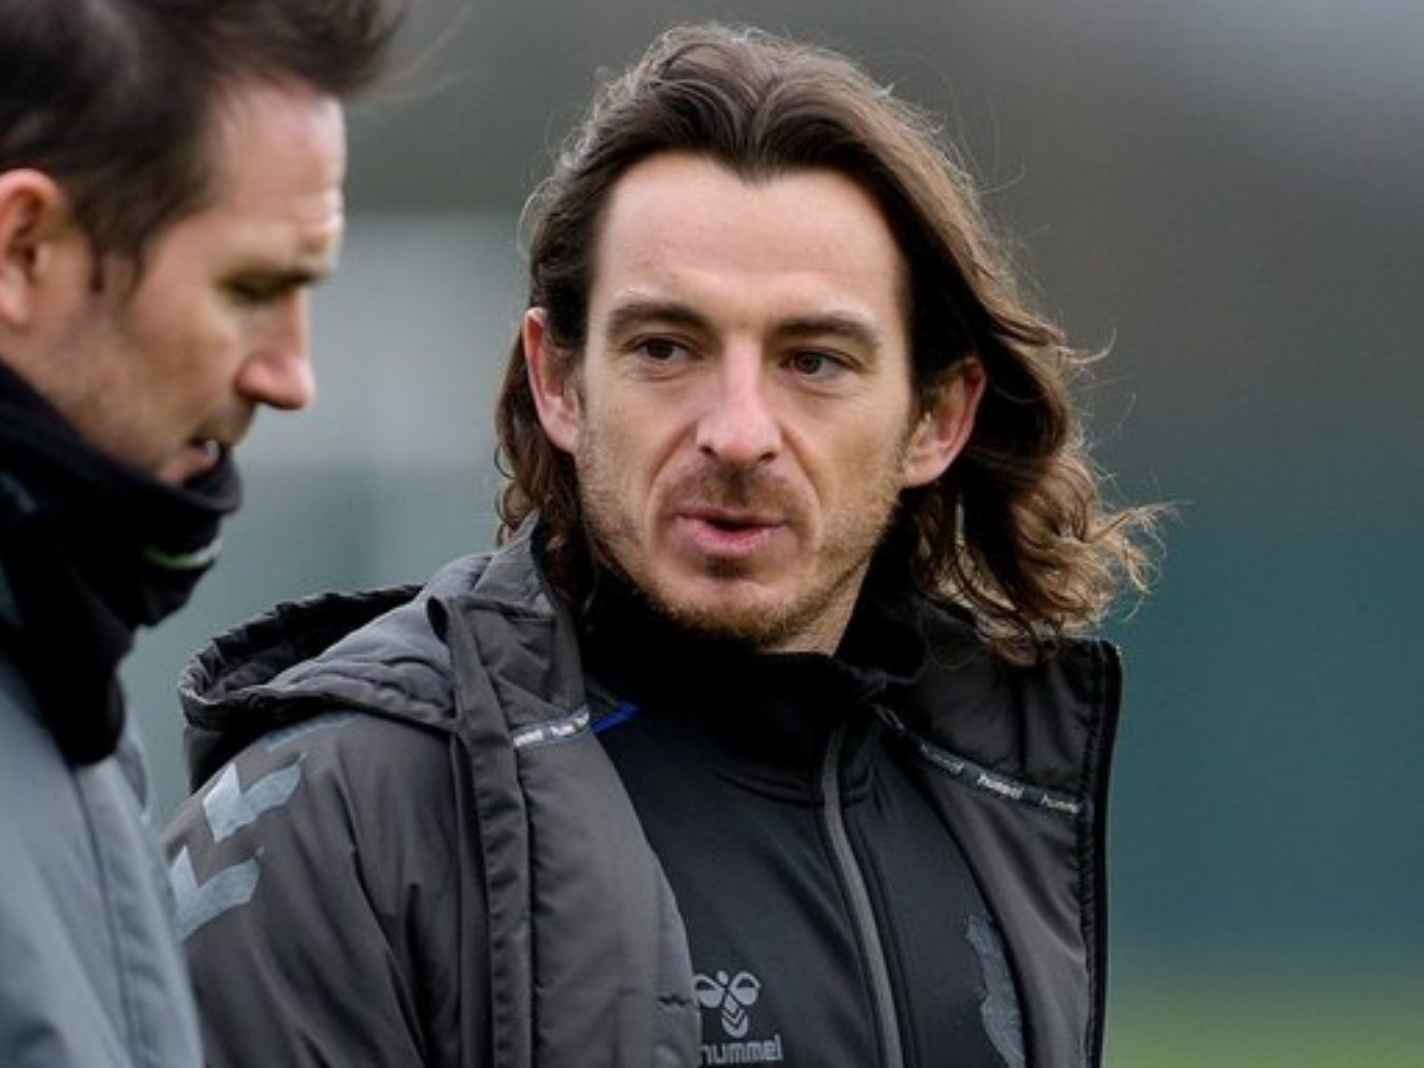 Former Everton player Leighton Baines looks unrecognizable with his hair down in training